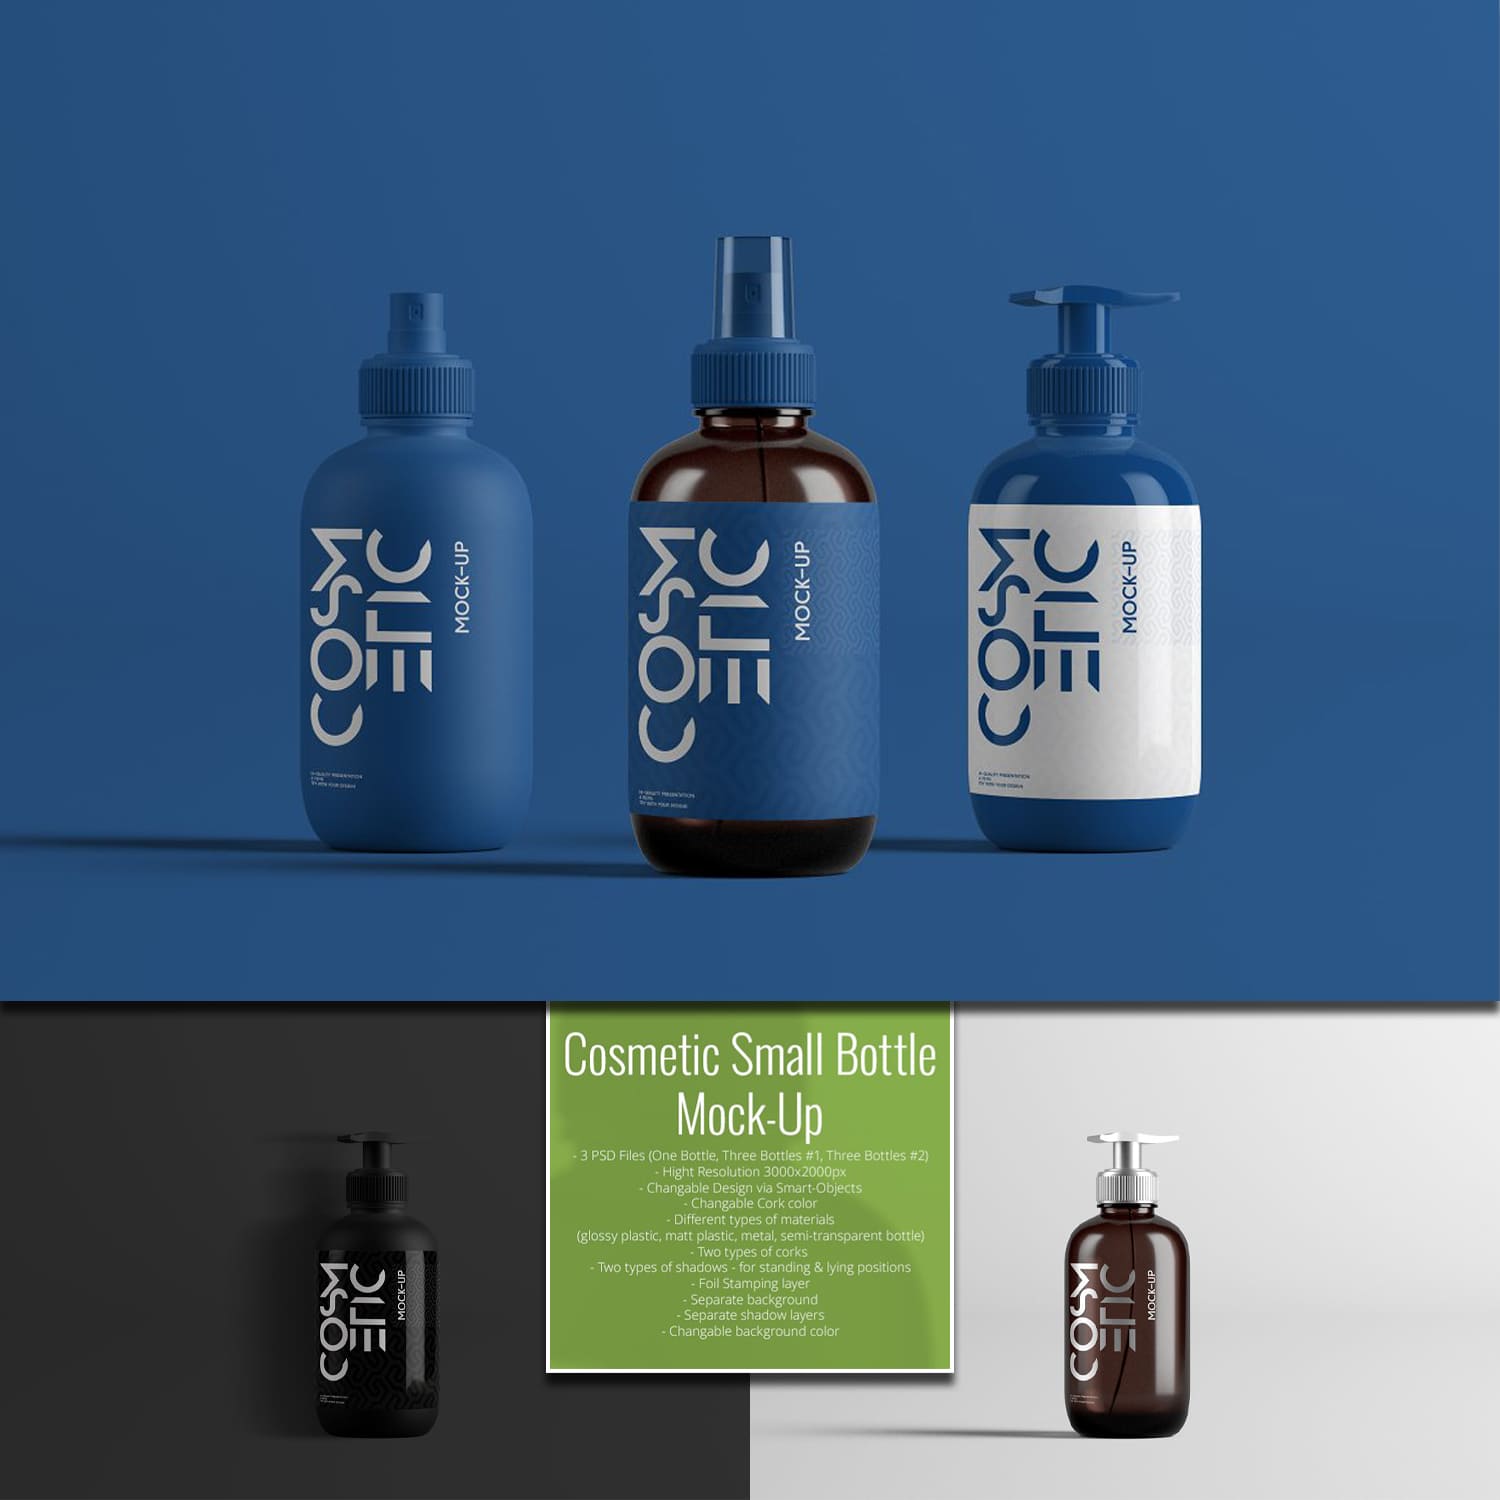 Cosmetic Small Bottle Mock-Up.